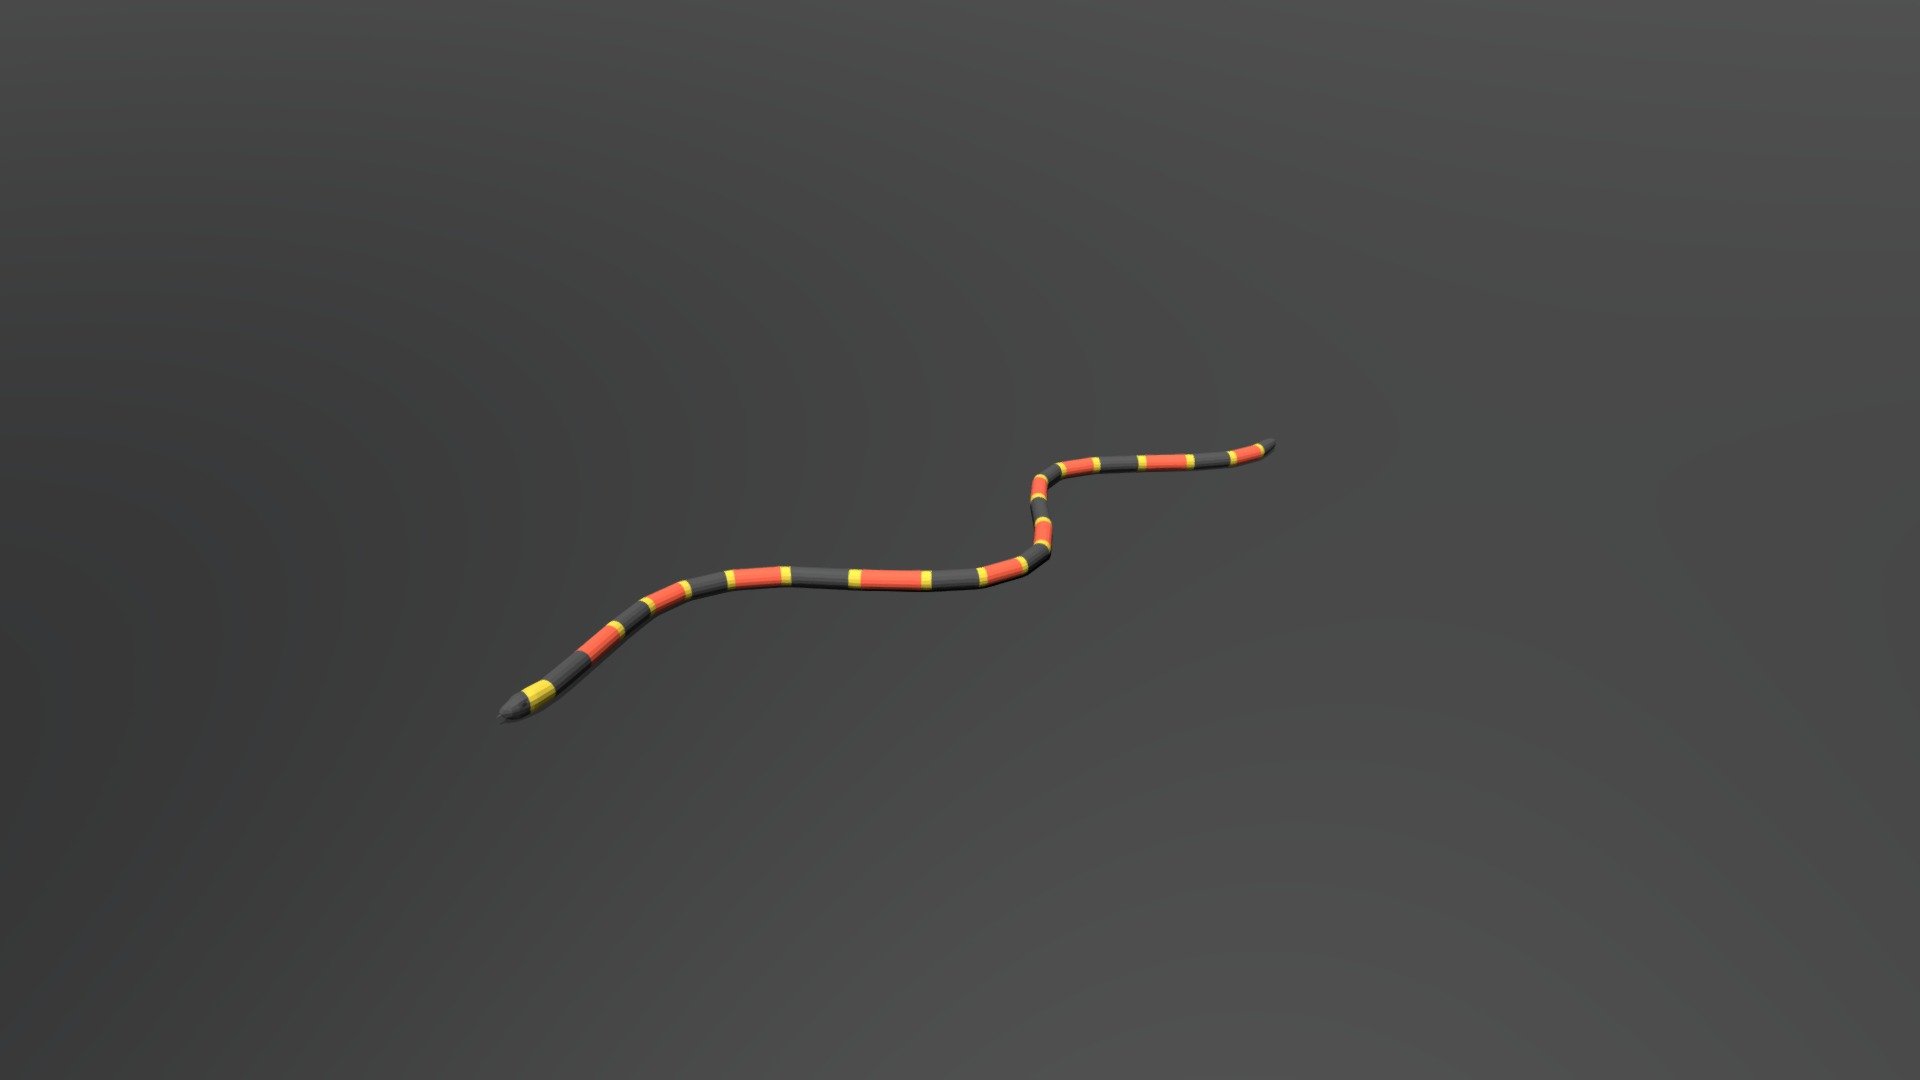 This is a low poly 3D model of a Coral Snake. The low poly Snake was modeled and prepared for low-poly style renderings, background, general CG visualization presented as a mesh with quads only.

Verts : 924 Faces: 922

The 3D model have simple materials with diffuse colors.

No ring, maps and no UVW mapping is available.

The original file was created in blender. You will receive a 3DS, OBJ, FBX, blend, DAE, Stl.

All preview images were rendered with Blender Cycles. Product is ready to render out-of-the-box. Please note that the lights, cameras, and background is only included in the .blend file. The model is clean and alone in the other provided files, centred at origin and has real-world scale 3d model